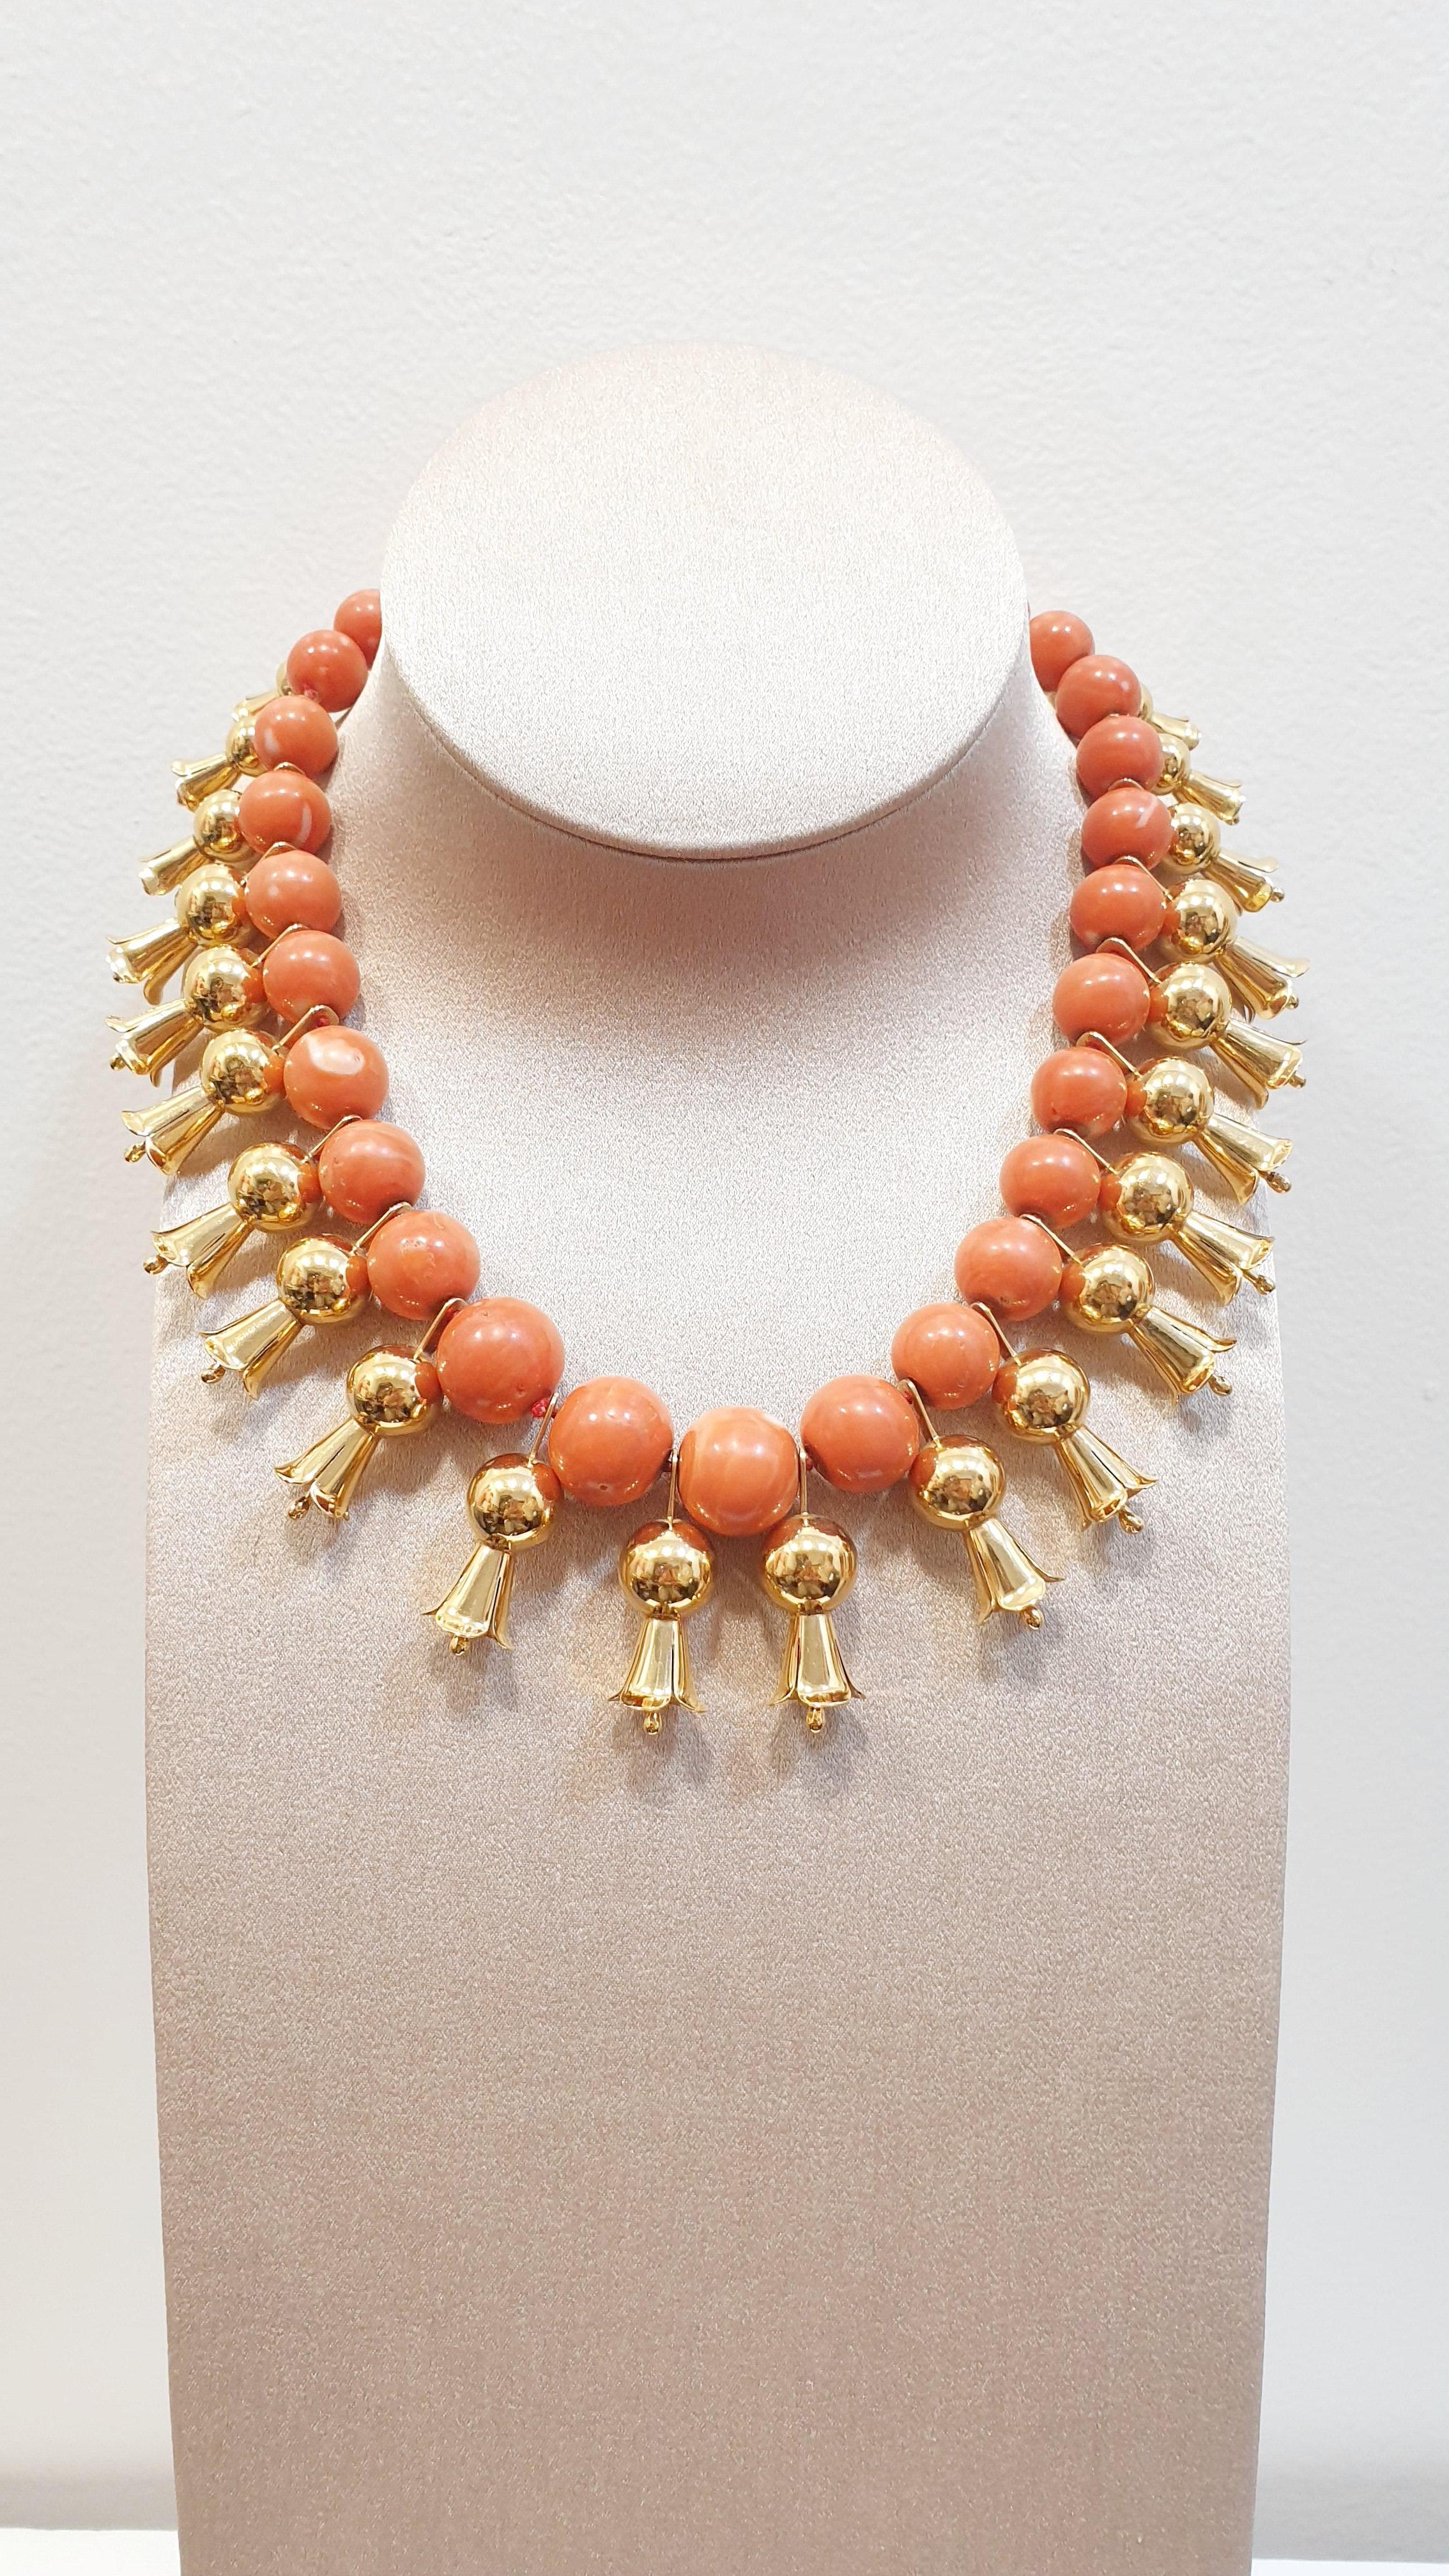 Campanula and Sardinian Coral 18k Gold Necklace from the 1960´s
Elegant and original  statement necklace composed of natural sardinian light coral  showcasing 27 natural round coral beads ranging
17mm  (0,66 in), 14mm (0,55in),  12 (0,47in) mm